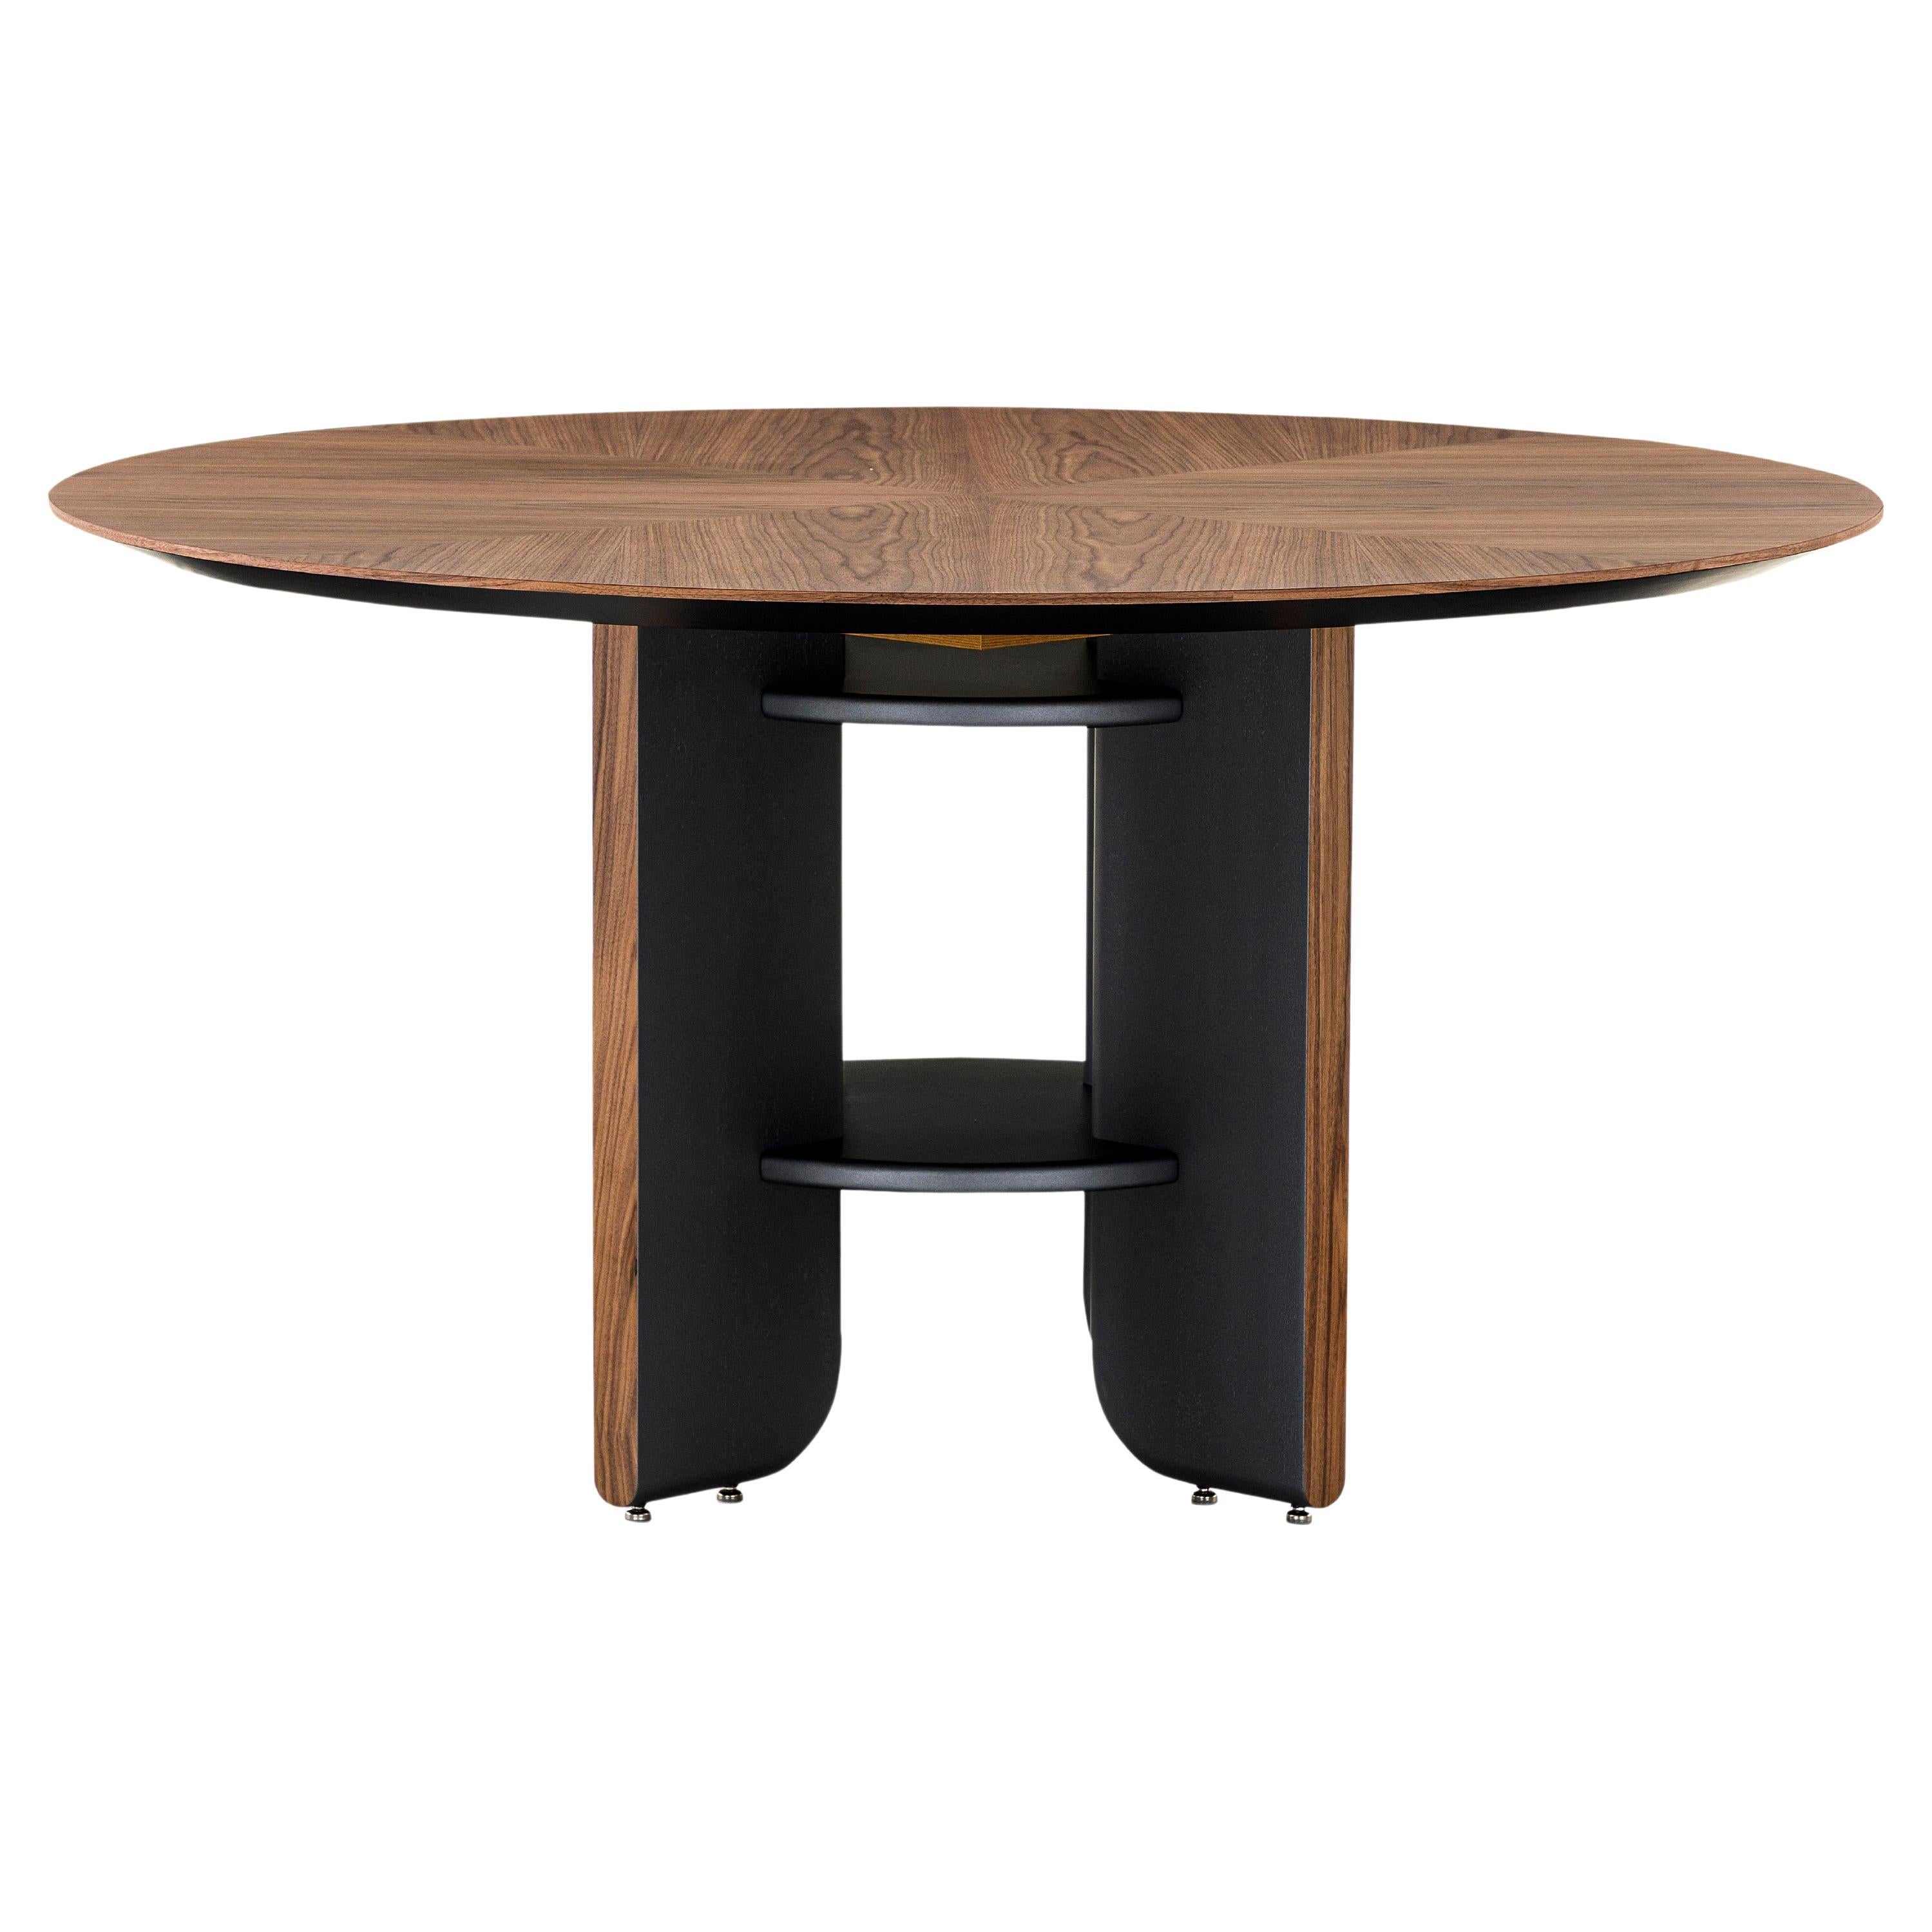 Moon Round Dining Table with Walnut Veneered Top and Black Wood Legs 63''